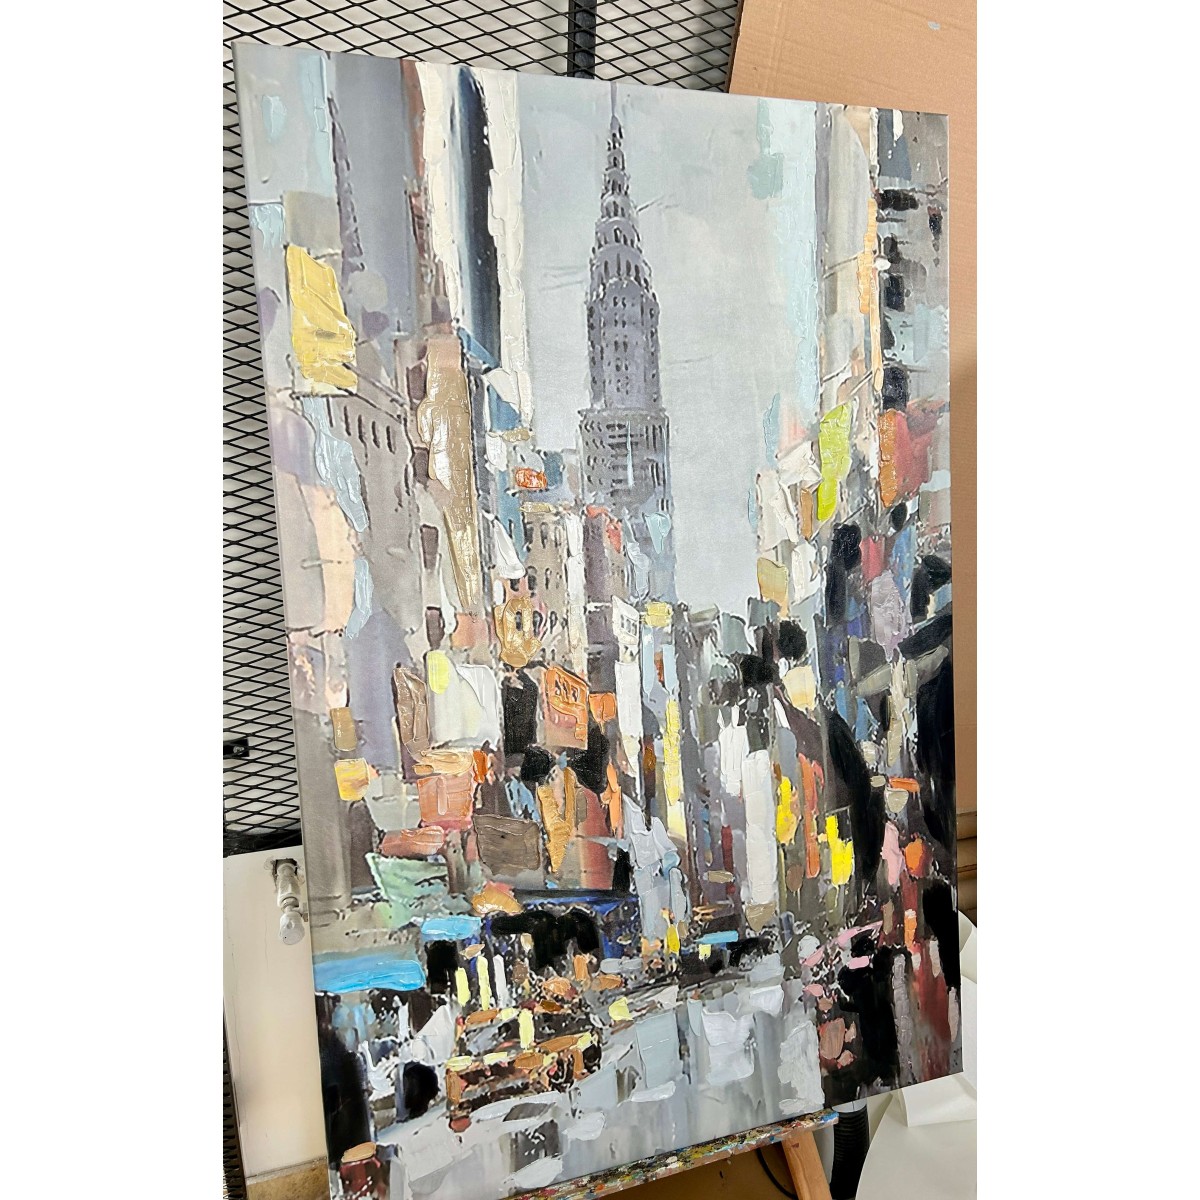 Abstract Metropol Street Textured Partial Oil Painting